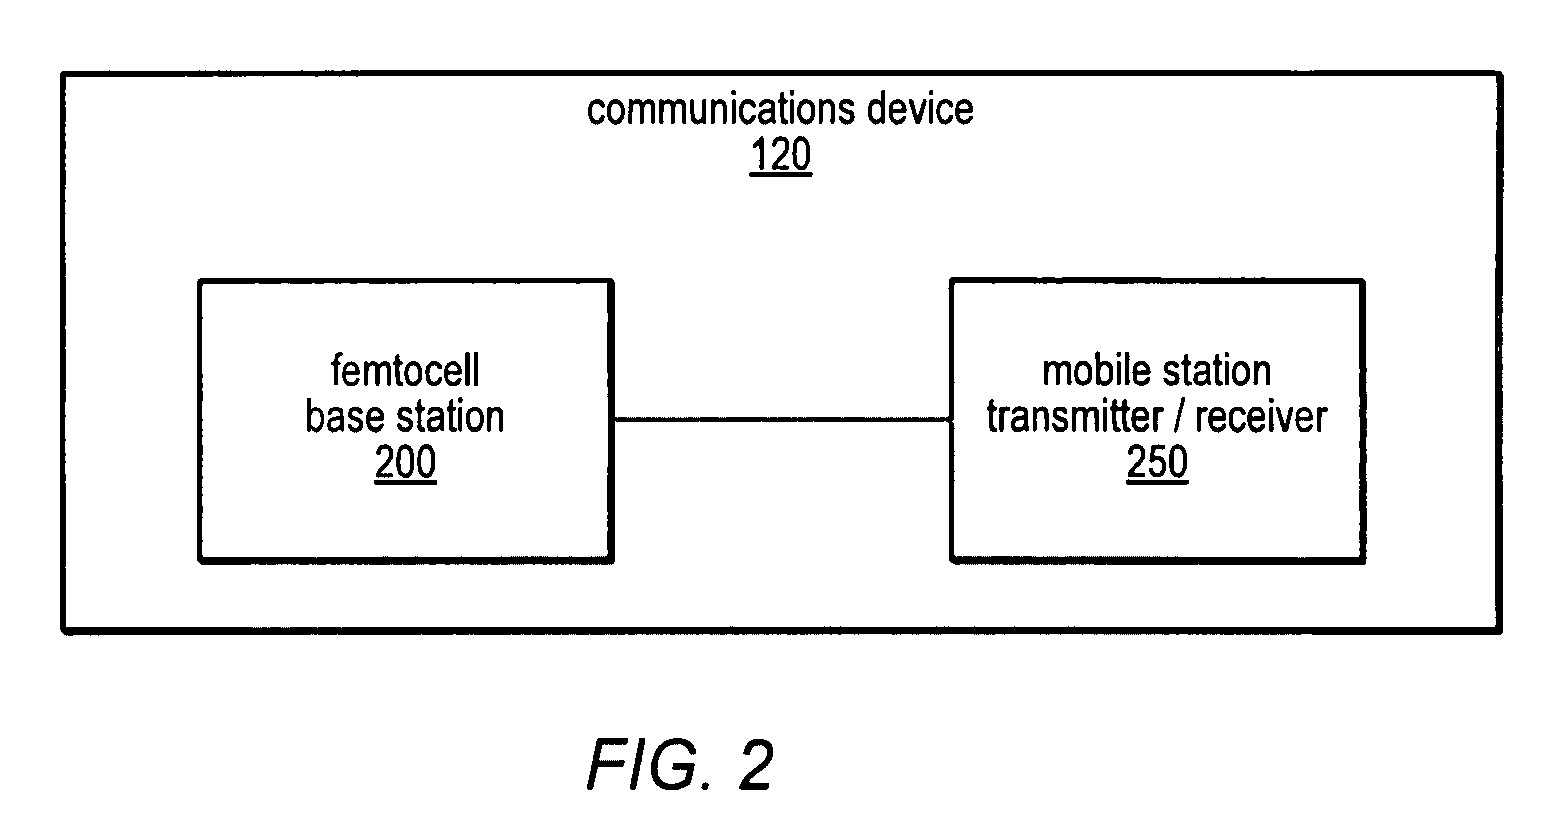 Femtocell base station with mobile station capability